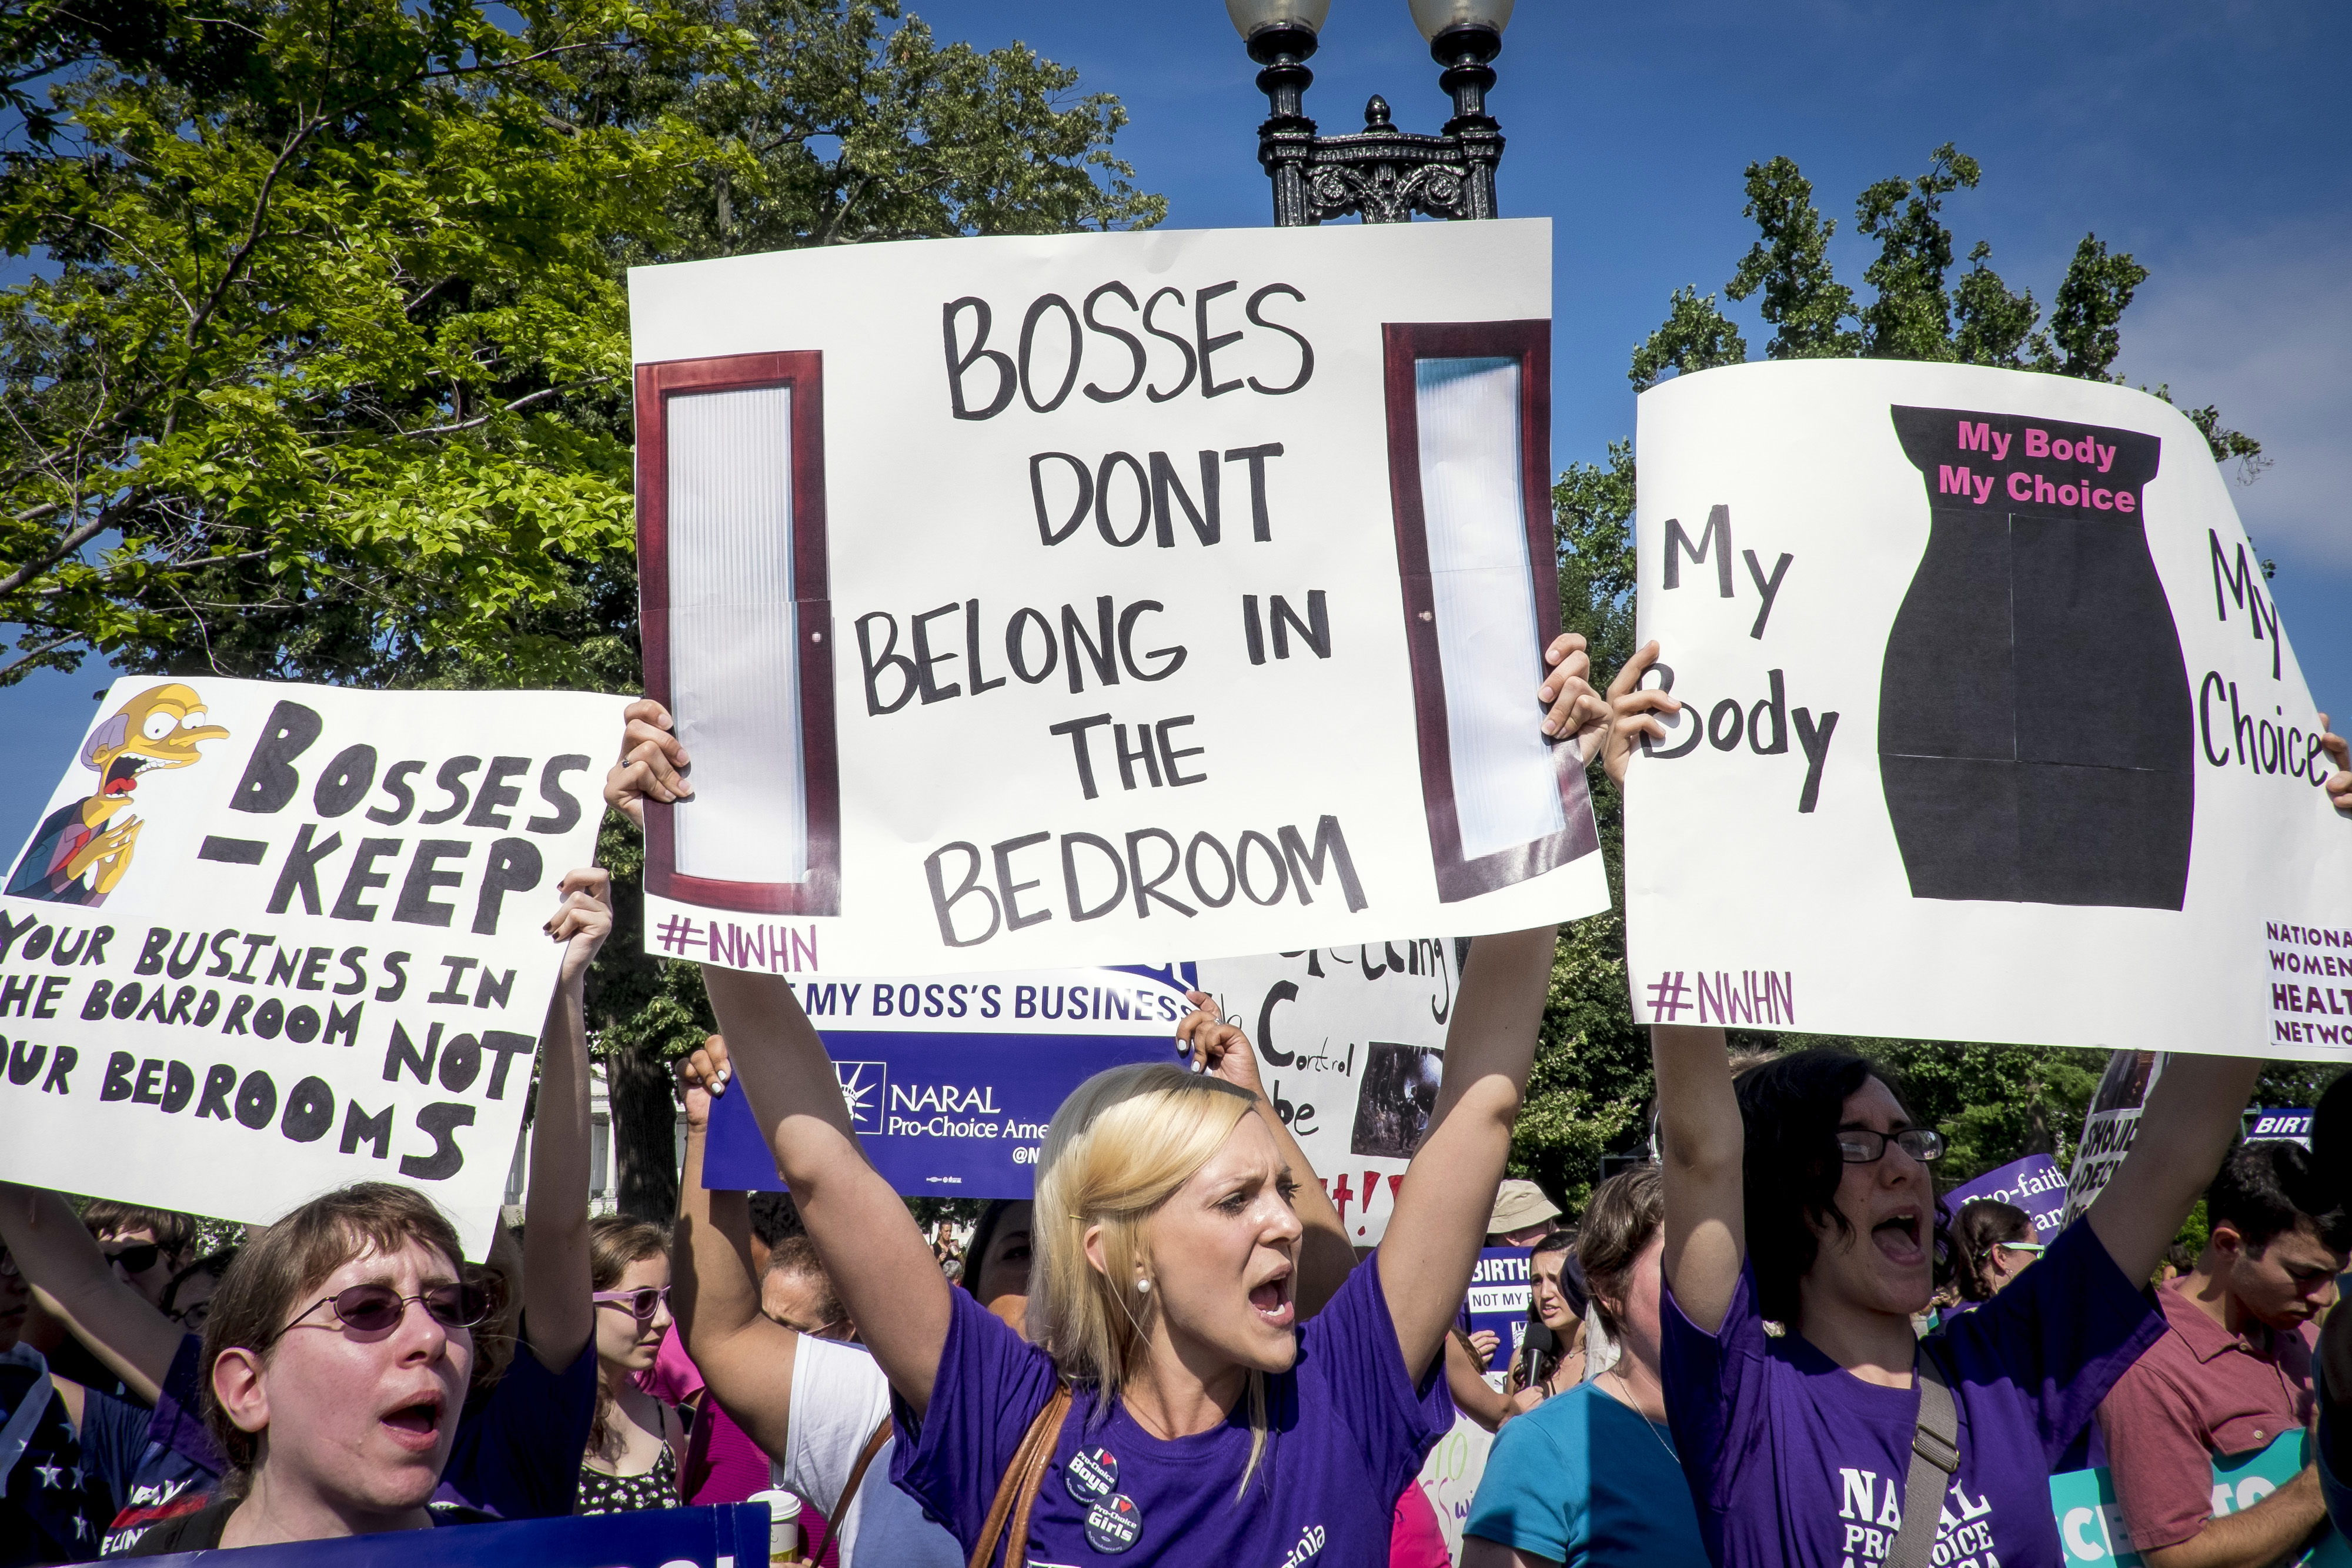 Activists who support the Affordable Care Act's employer contraceptive mandate demonstrate outside of the U.S. Supreme Court in Washington, D.C., U.S., on Monday, June 30, 2014. (Bloomberg&mdash;Bloomberg via Getty Images)